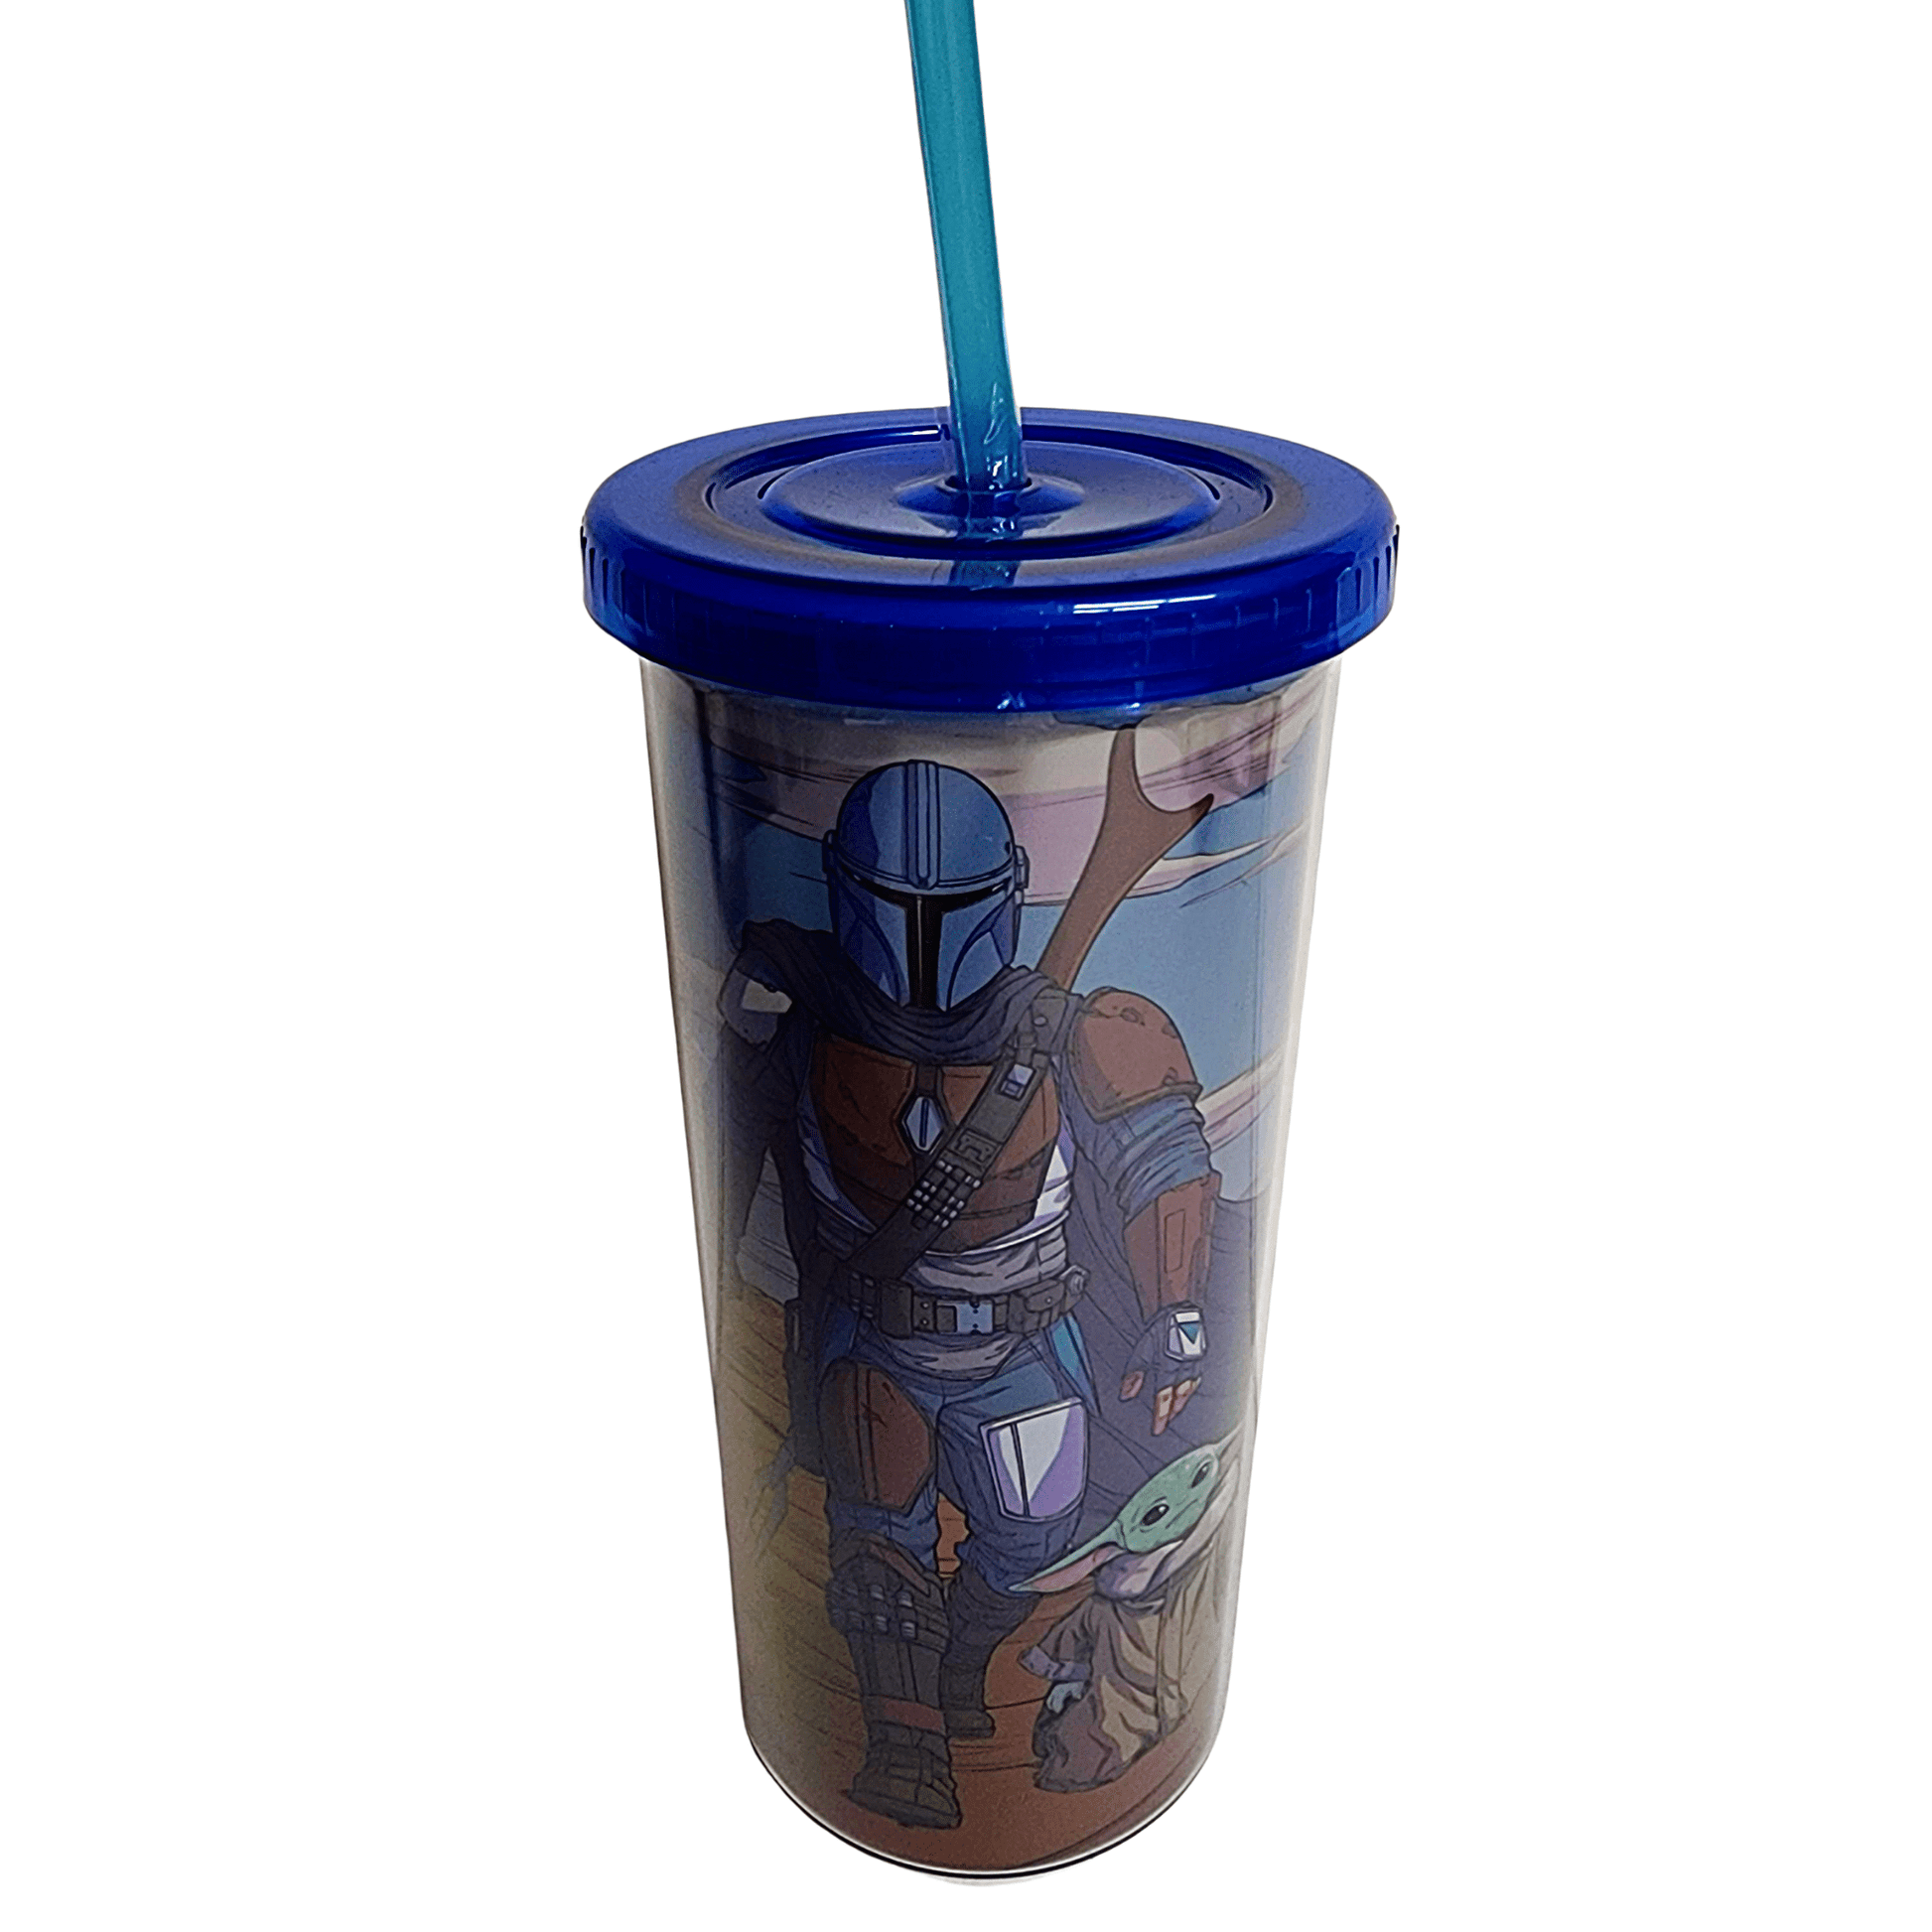 Star Wars The Mandalorian The Child Reusable Straw with Case